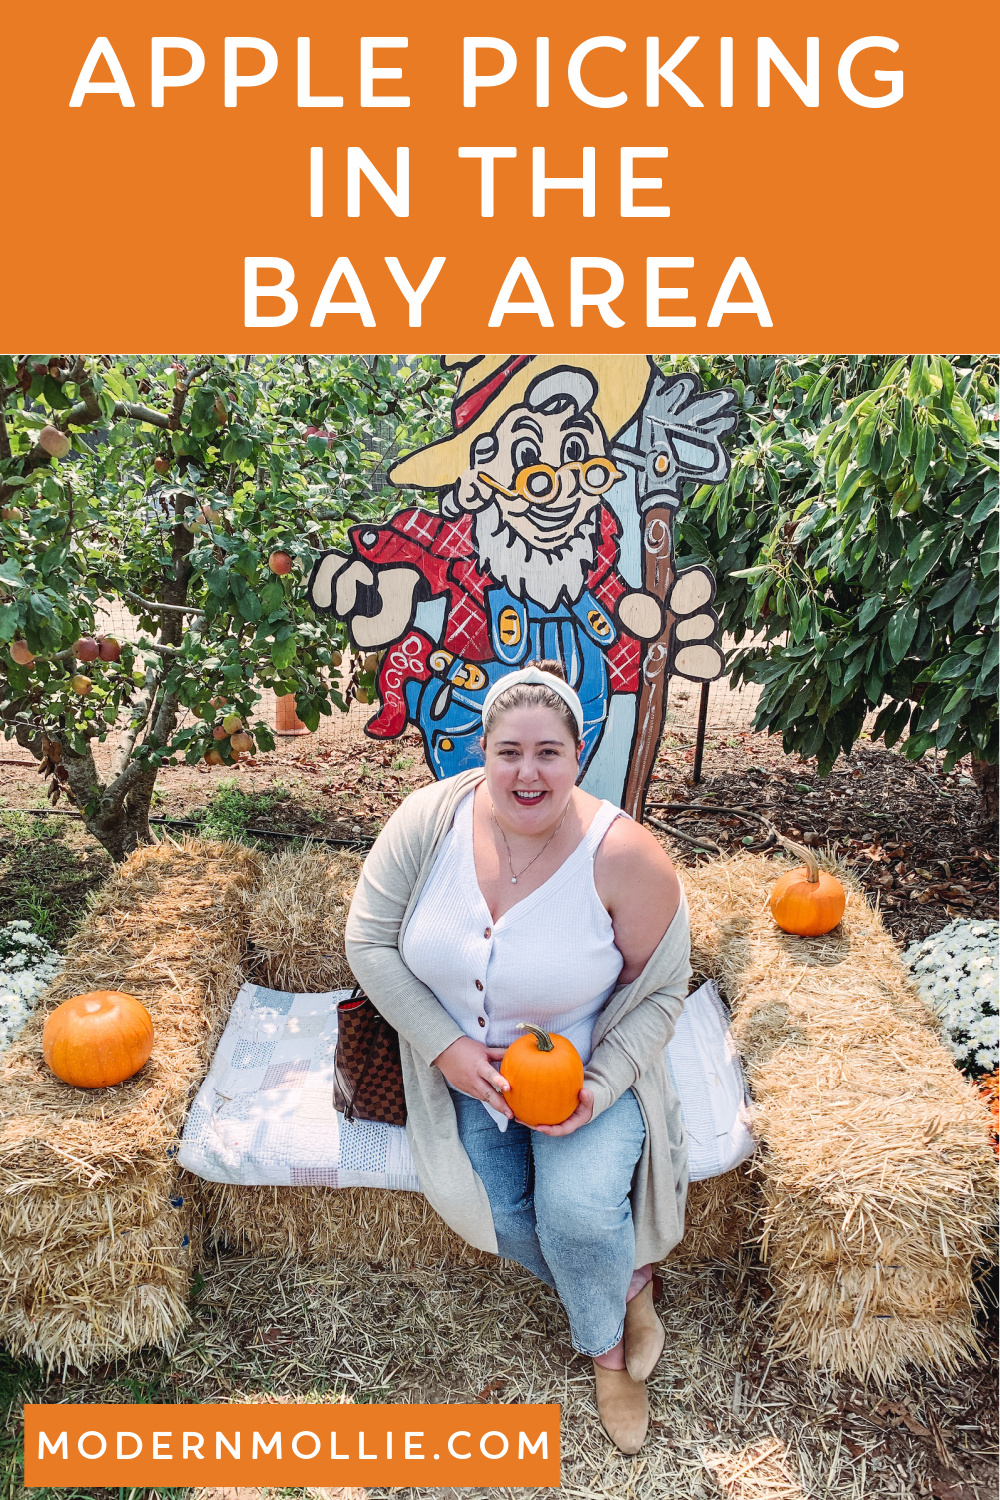 Apple Picking in the Bay Area